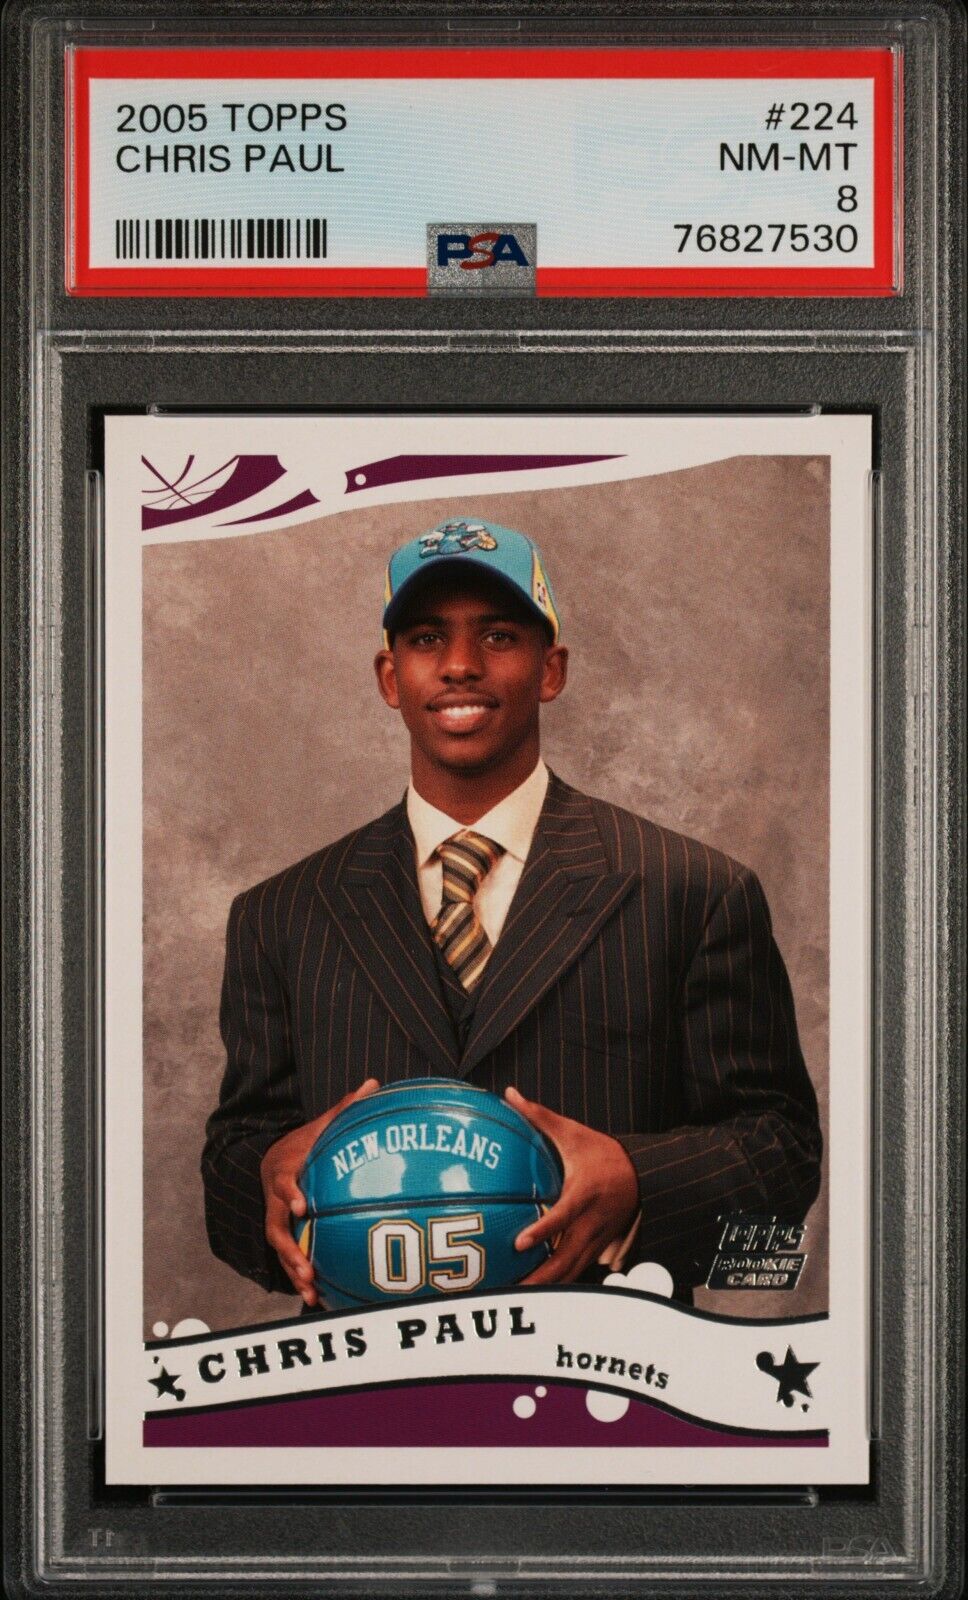 2005 Topps Chris Paul Rookie Card #224 - PSA 8 - Hornets (Hall of Fame!)